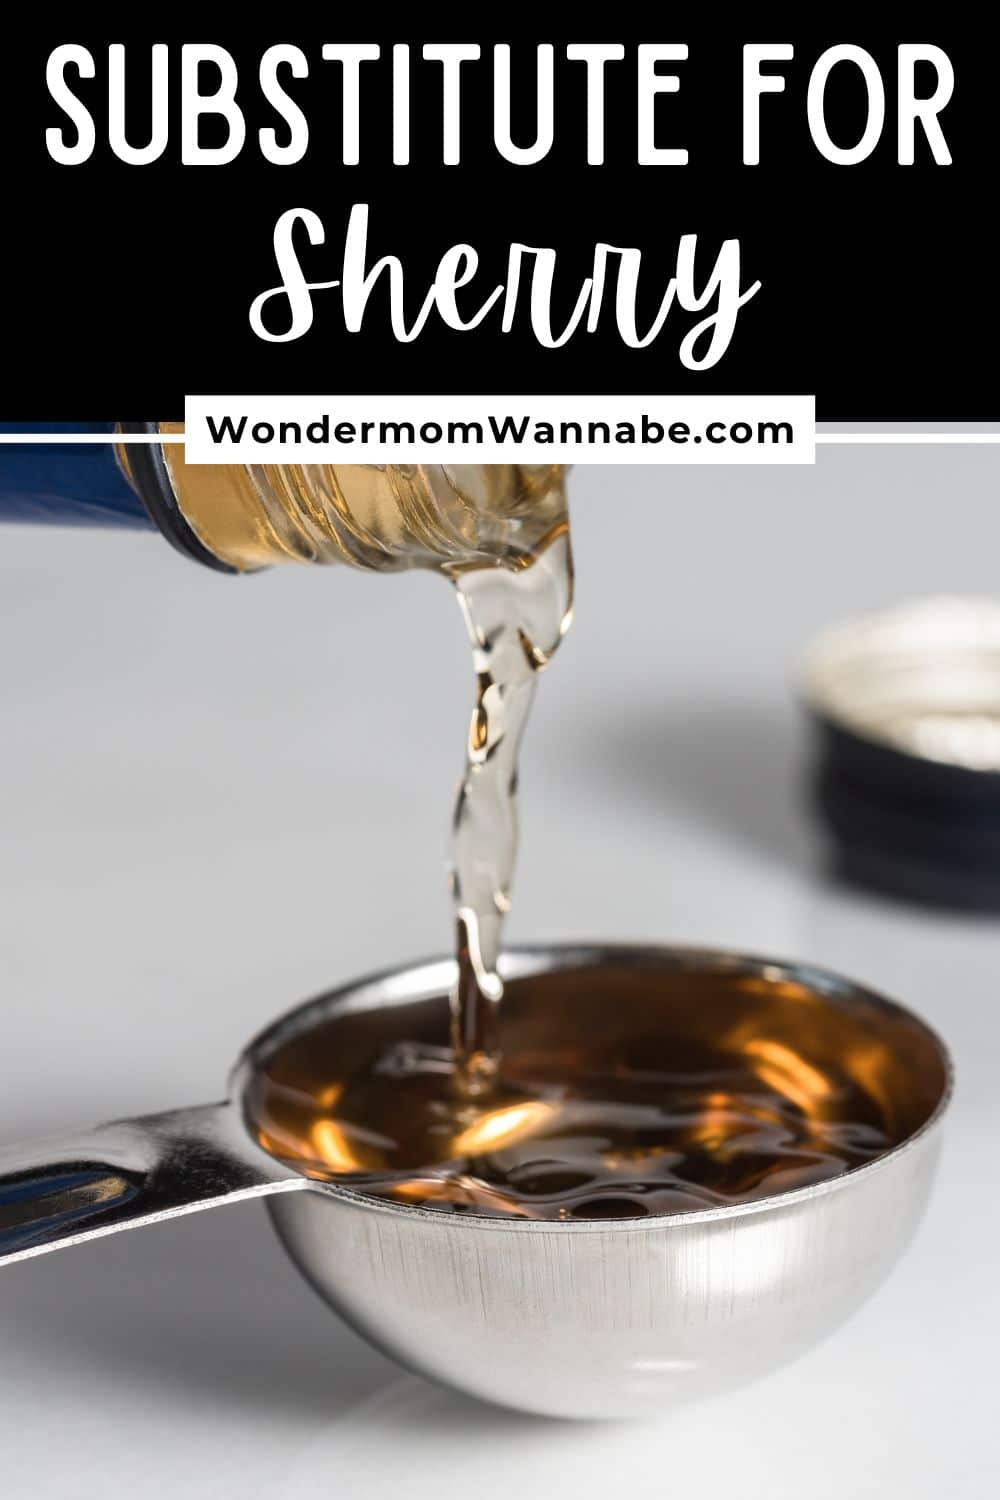 Learn how to find a suitable substitute for sherry in your recipes.